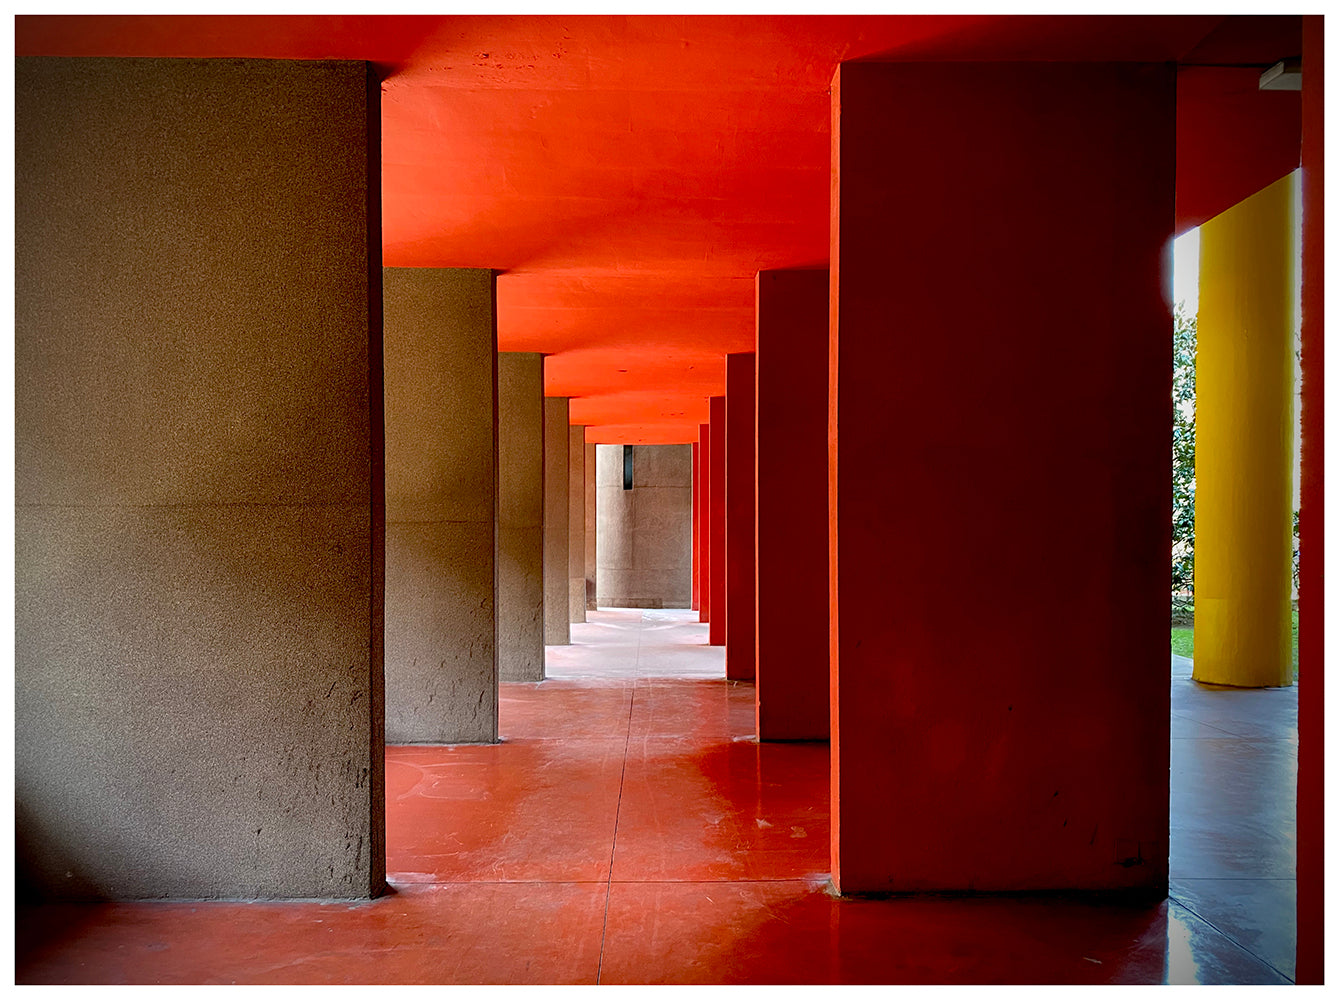 Red and yellow brutalist concrete architecture photograph by Richard Heeps.